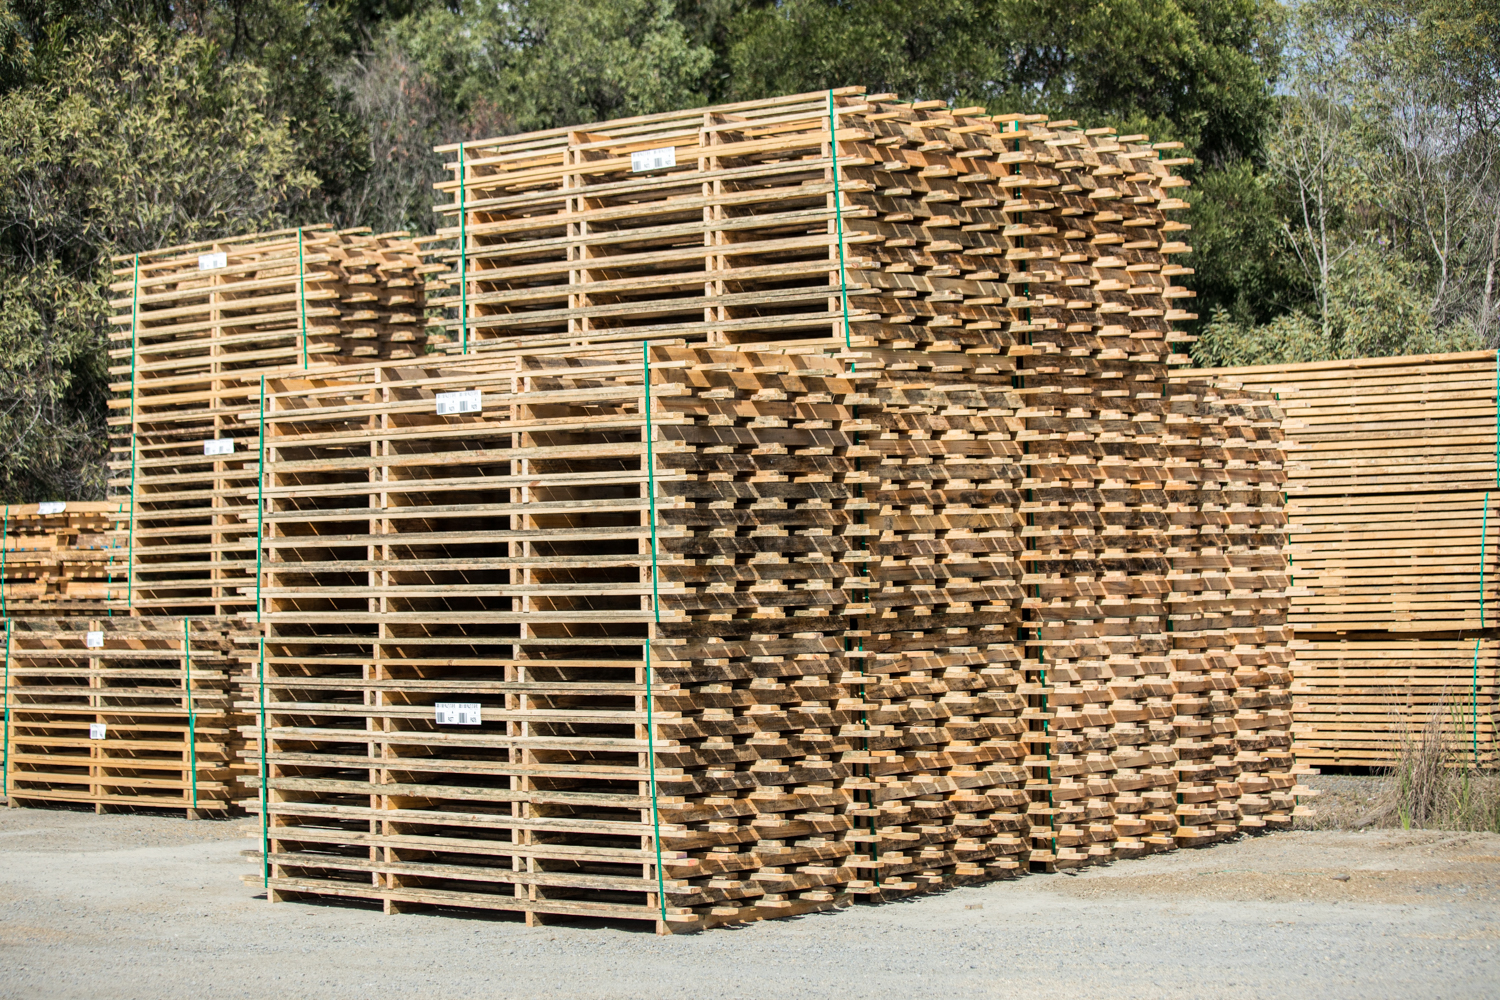 Australian Pallet Sizes: Everything You Need to Know